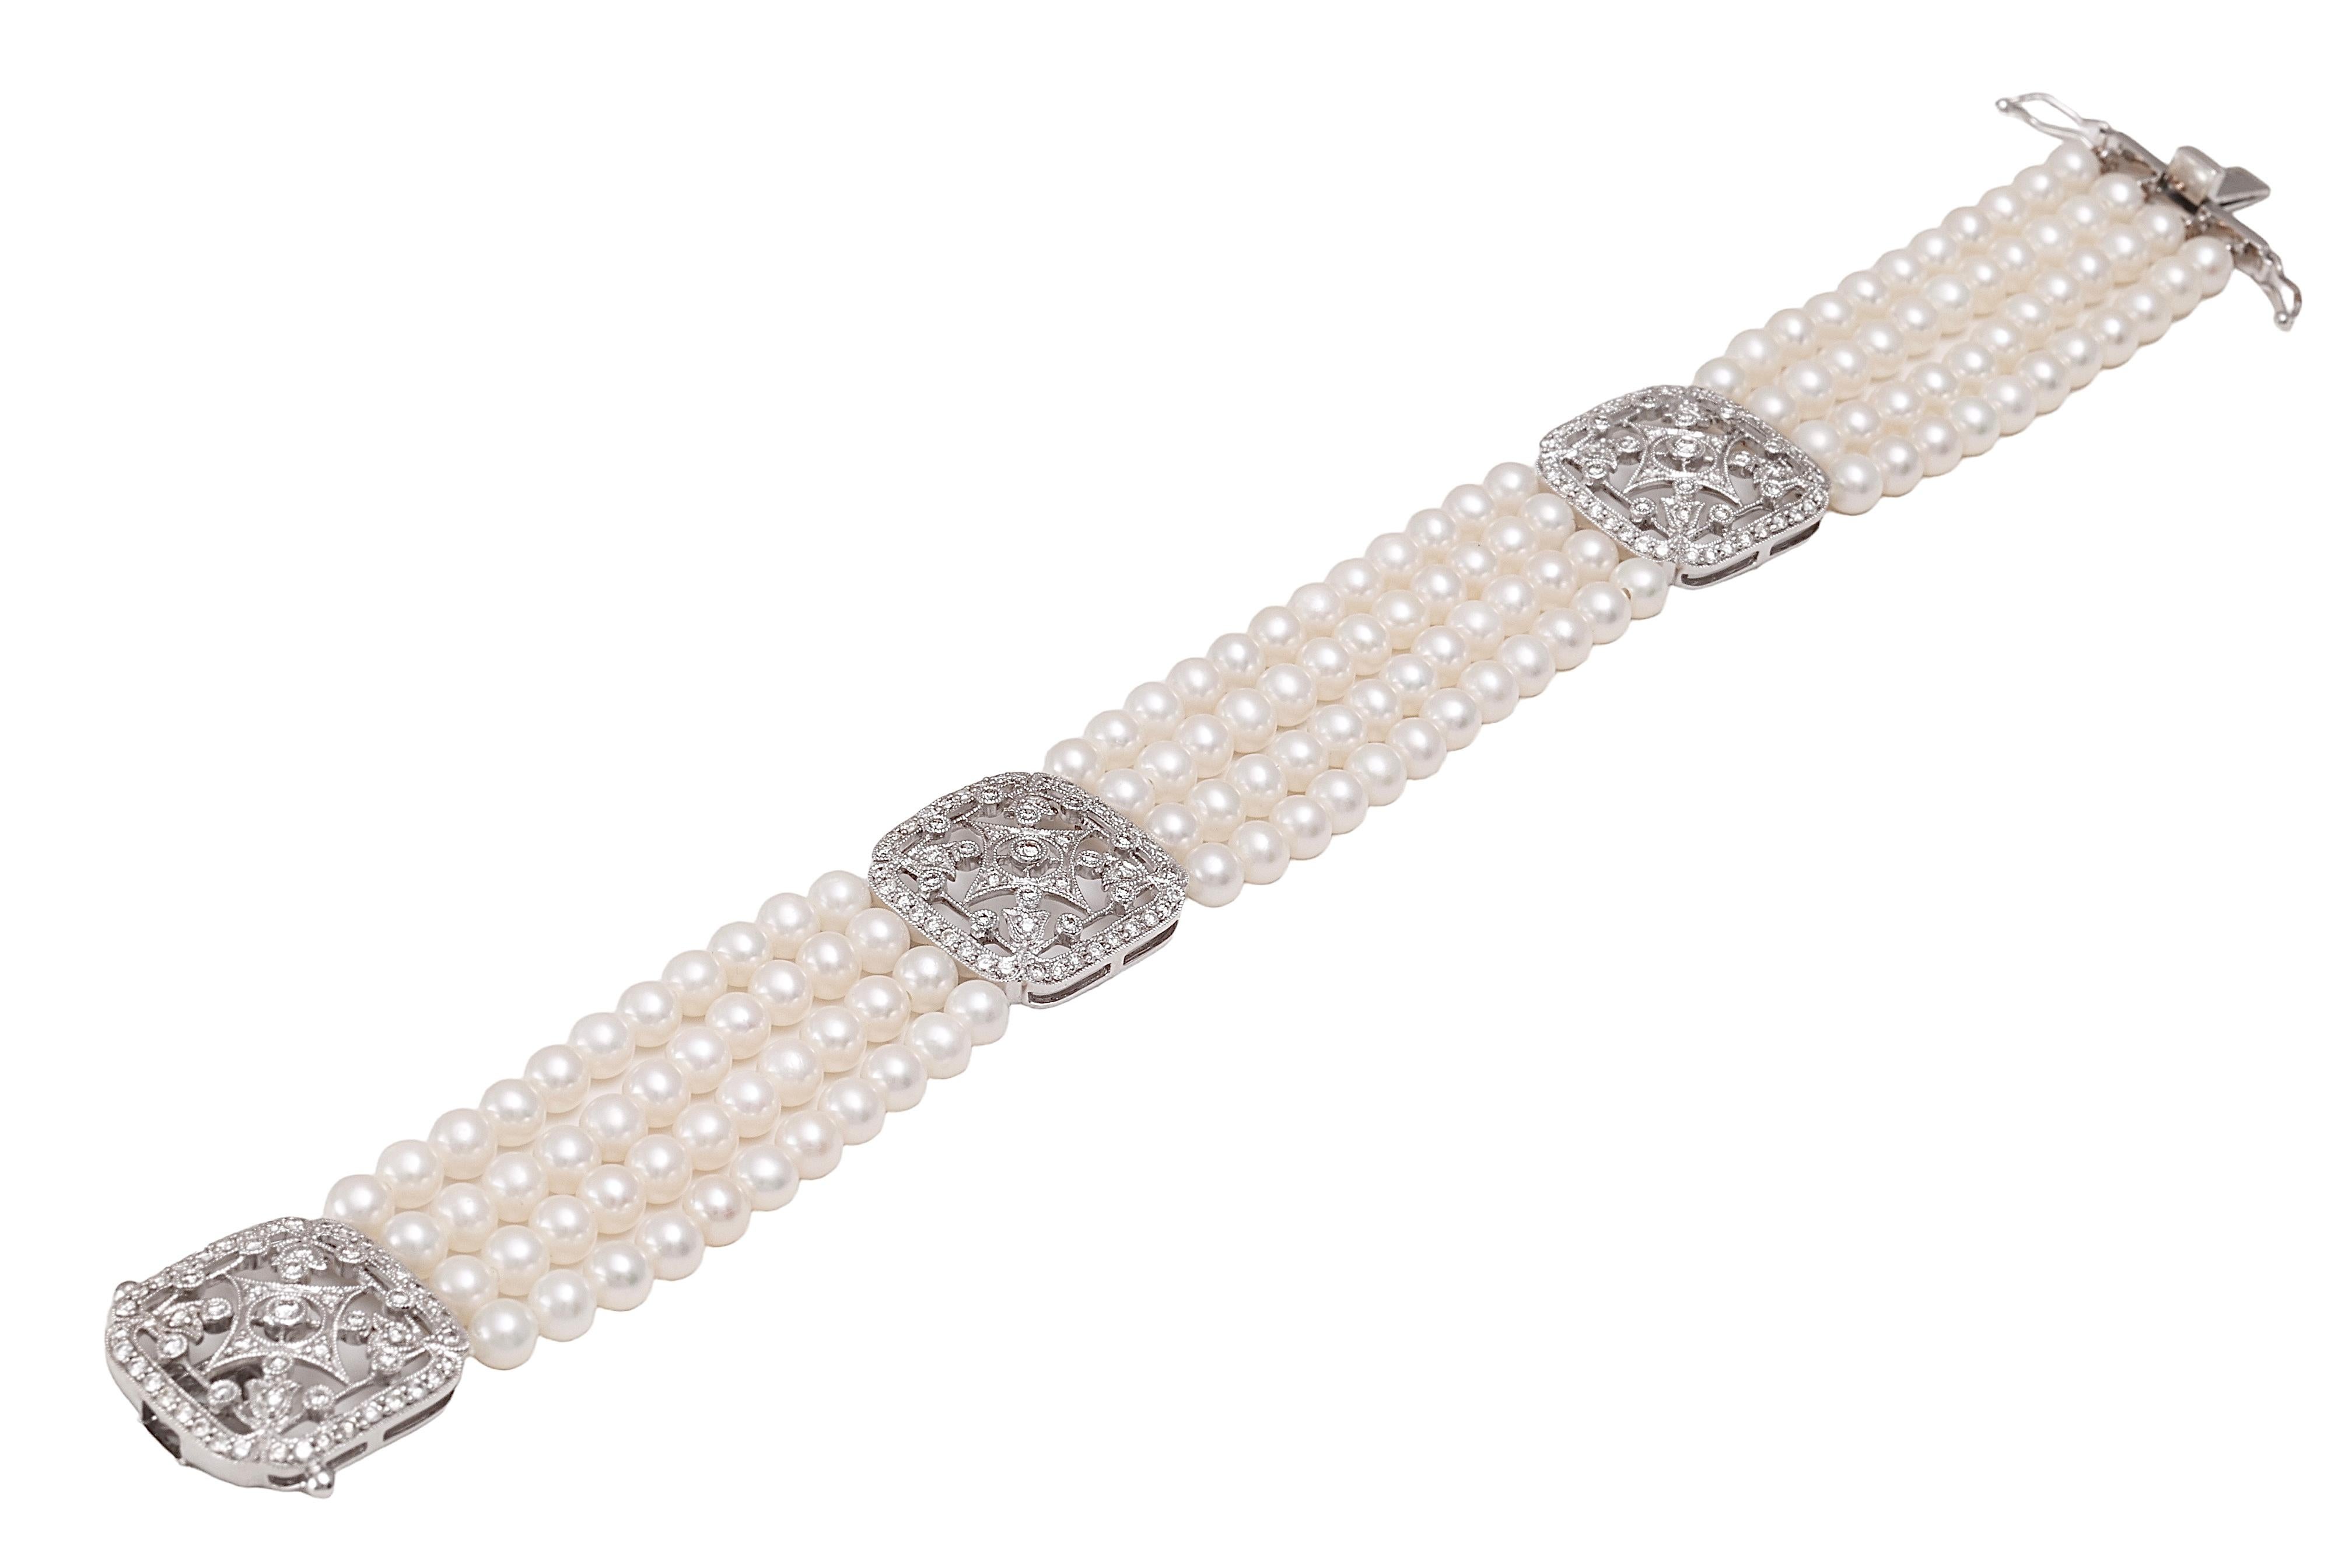 Gorgeous 18 kt. White Gold Bracelet with 4 Rows of Pearls and 1.06 ct. Brilliant Cut Diamonds

Pearls: 136 pearls

Diamonds: 171 brilliant diamonds together 1.06 ct. 

Material: 18 kt. white gold 

Measurements: This bracelet will maximum fit a 17